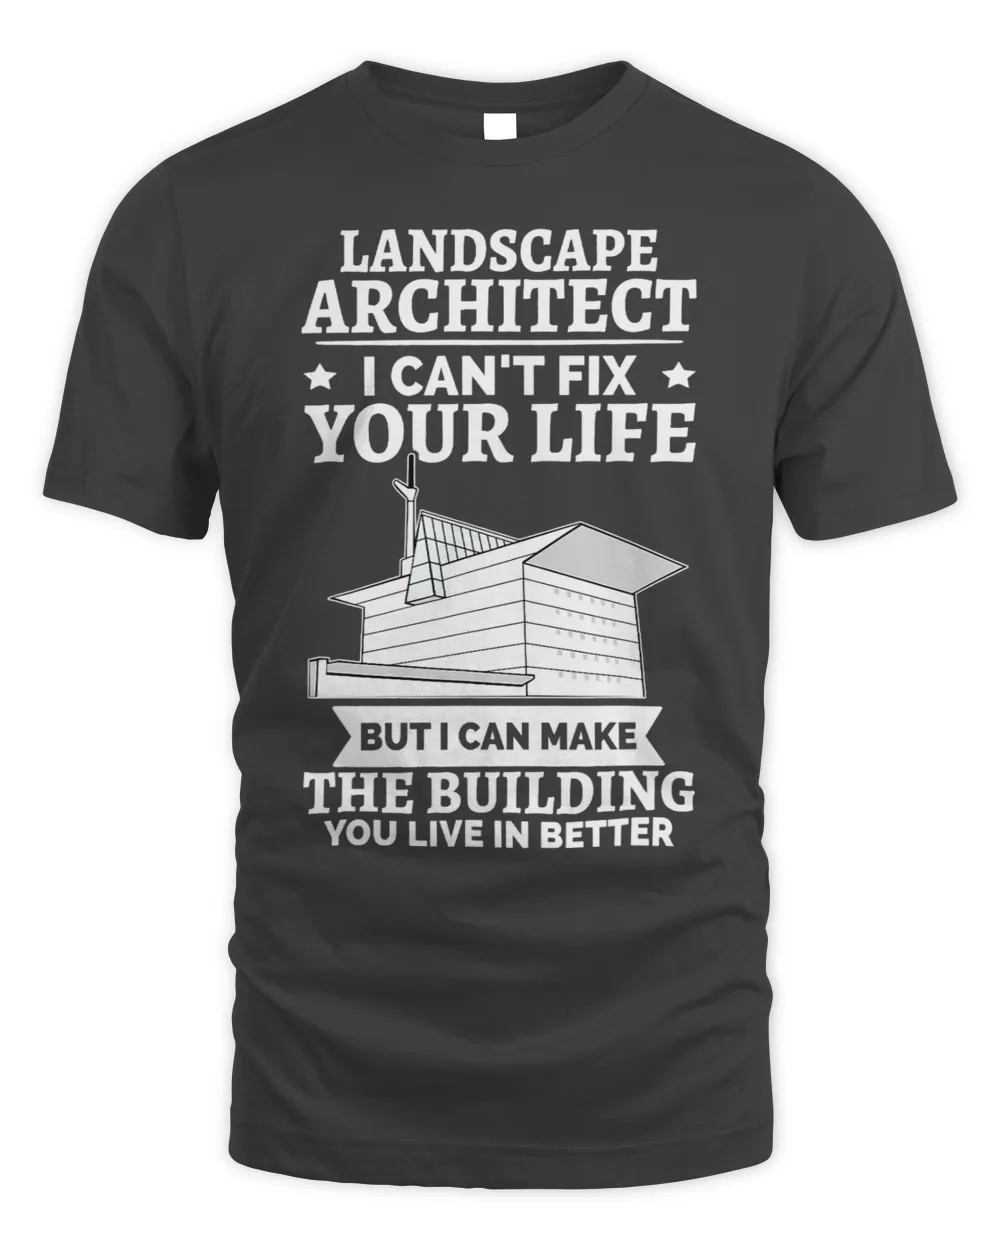 Landscape Architect Make the Building You Live in Better